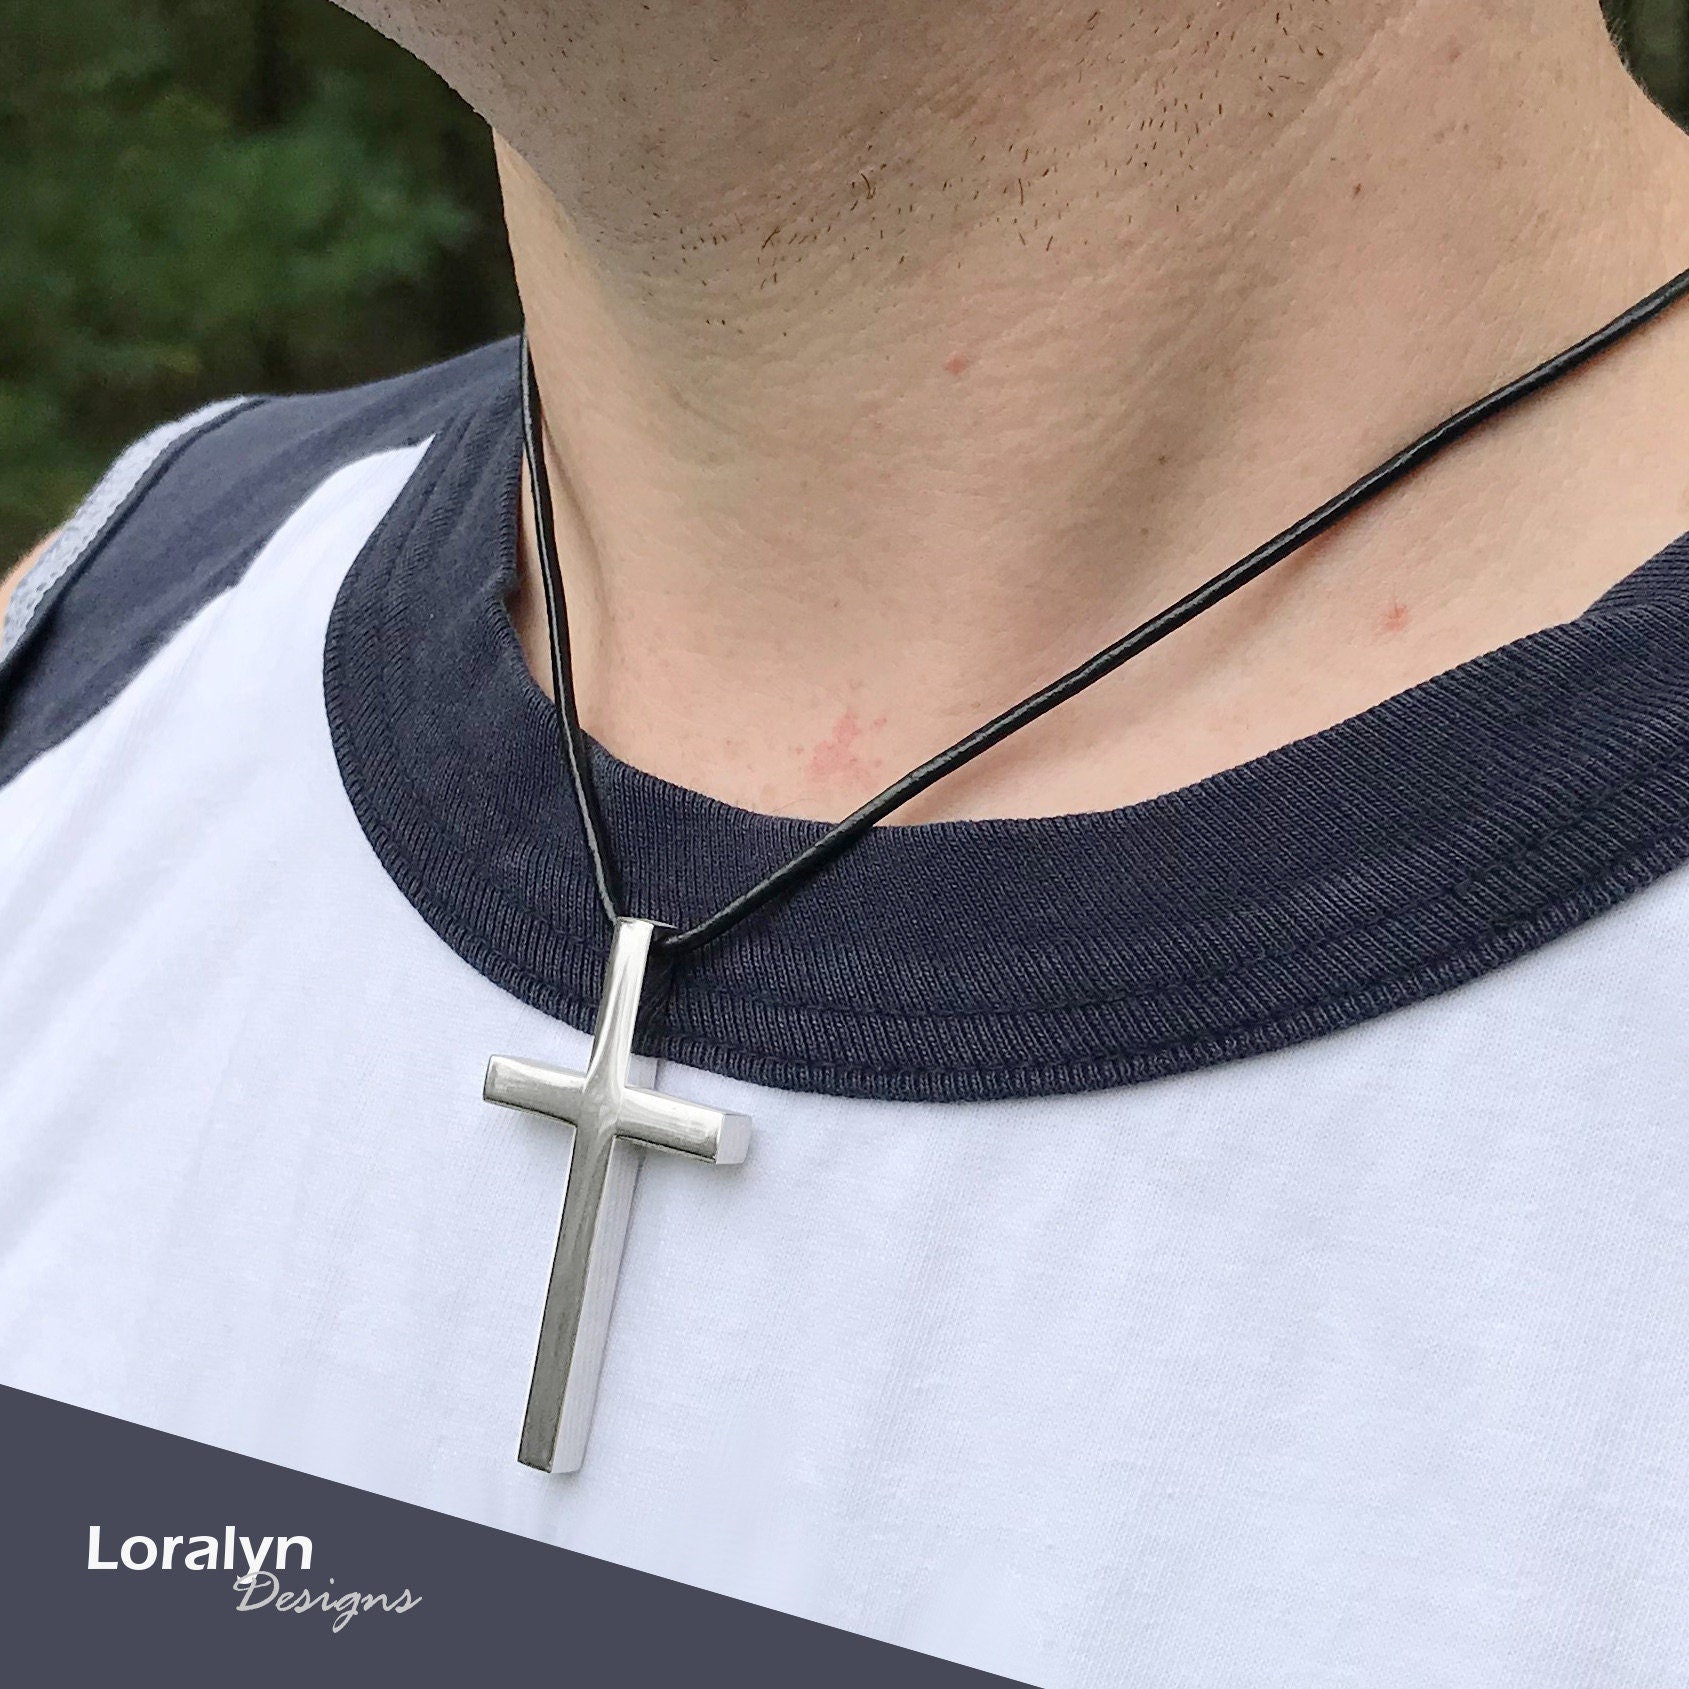 Ethiopian Leather Coptic Cross Amulet Leather Cross Necklace, Christian  Jewelry, Braided Leather,mens Leather Cross,leather Necklace - Etsy